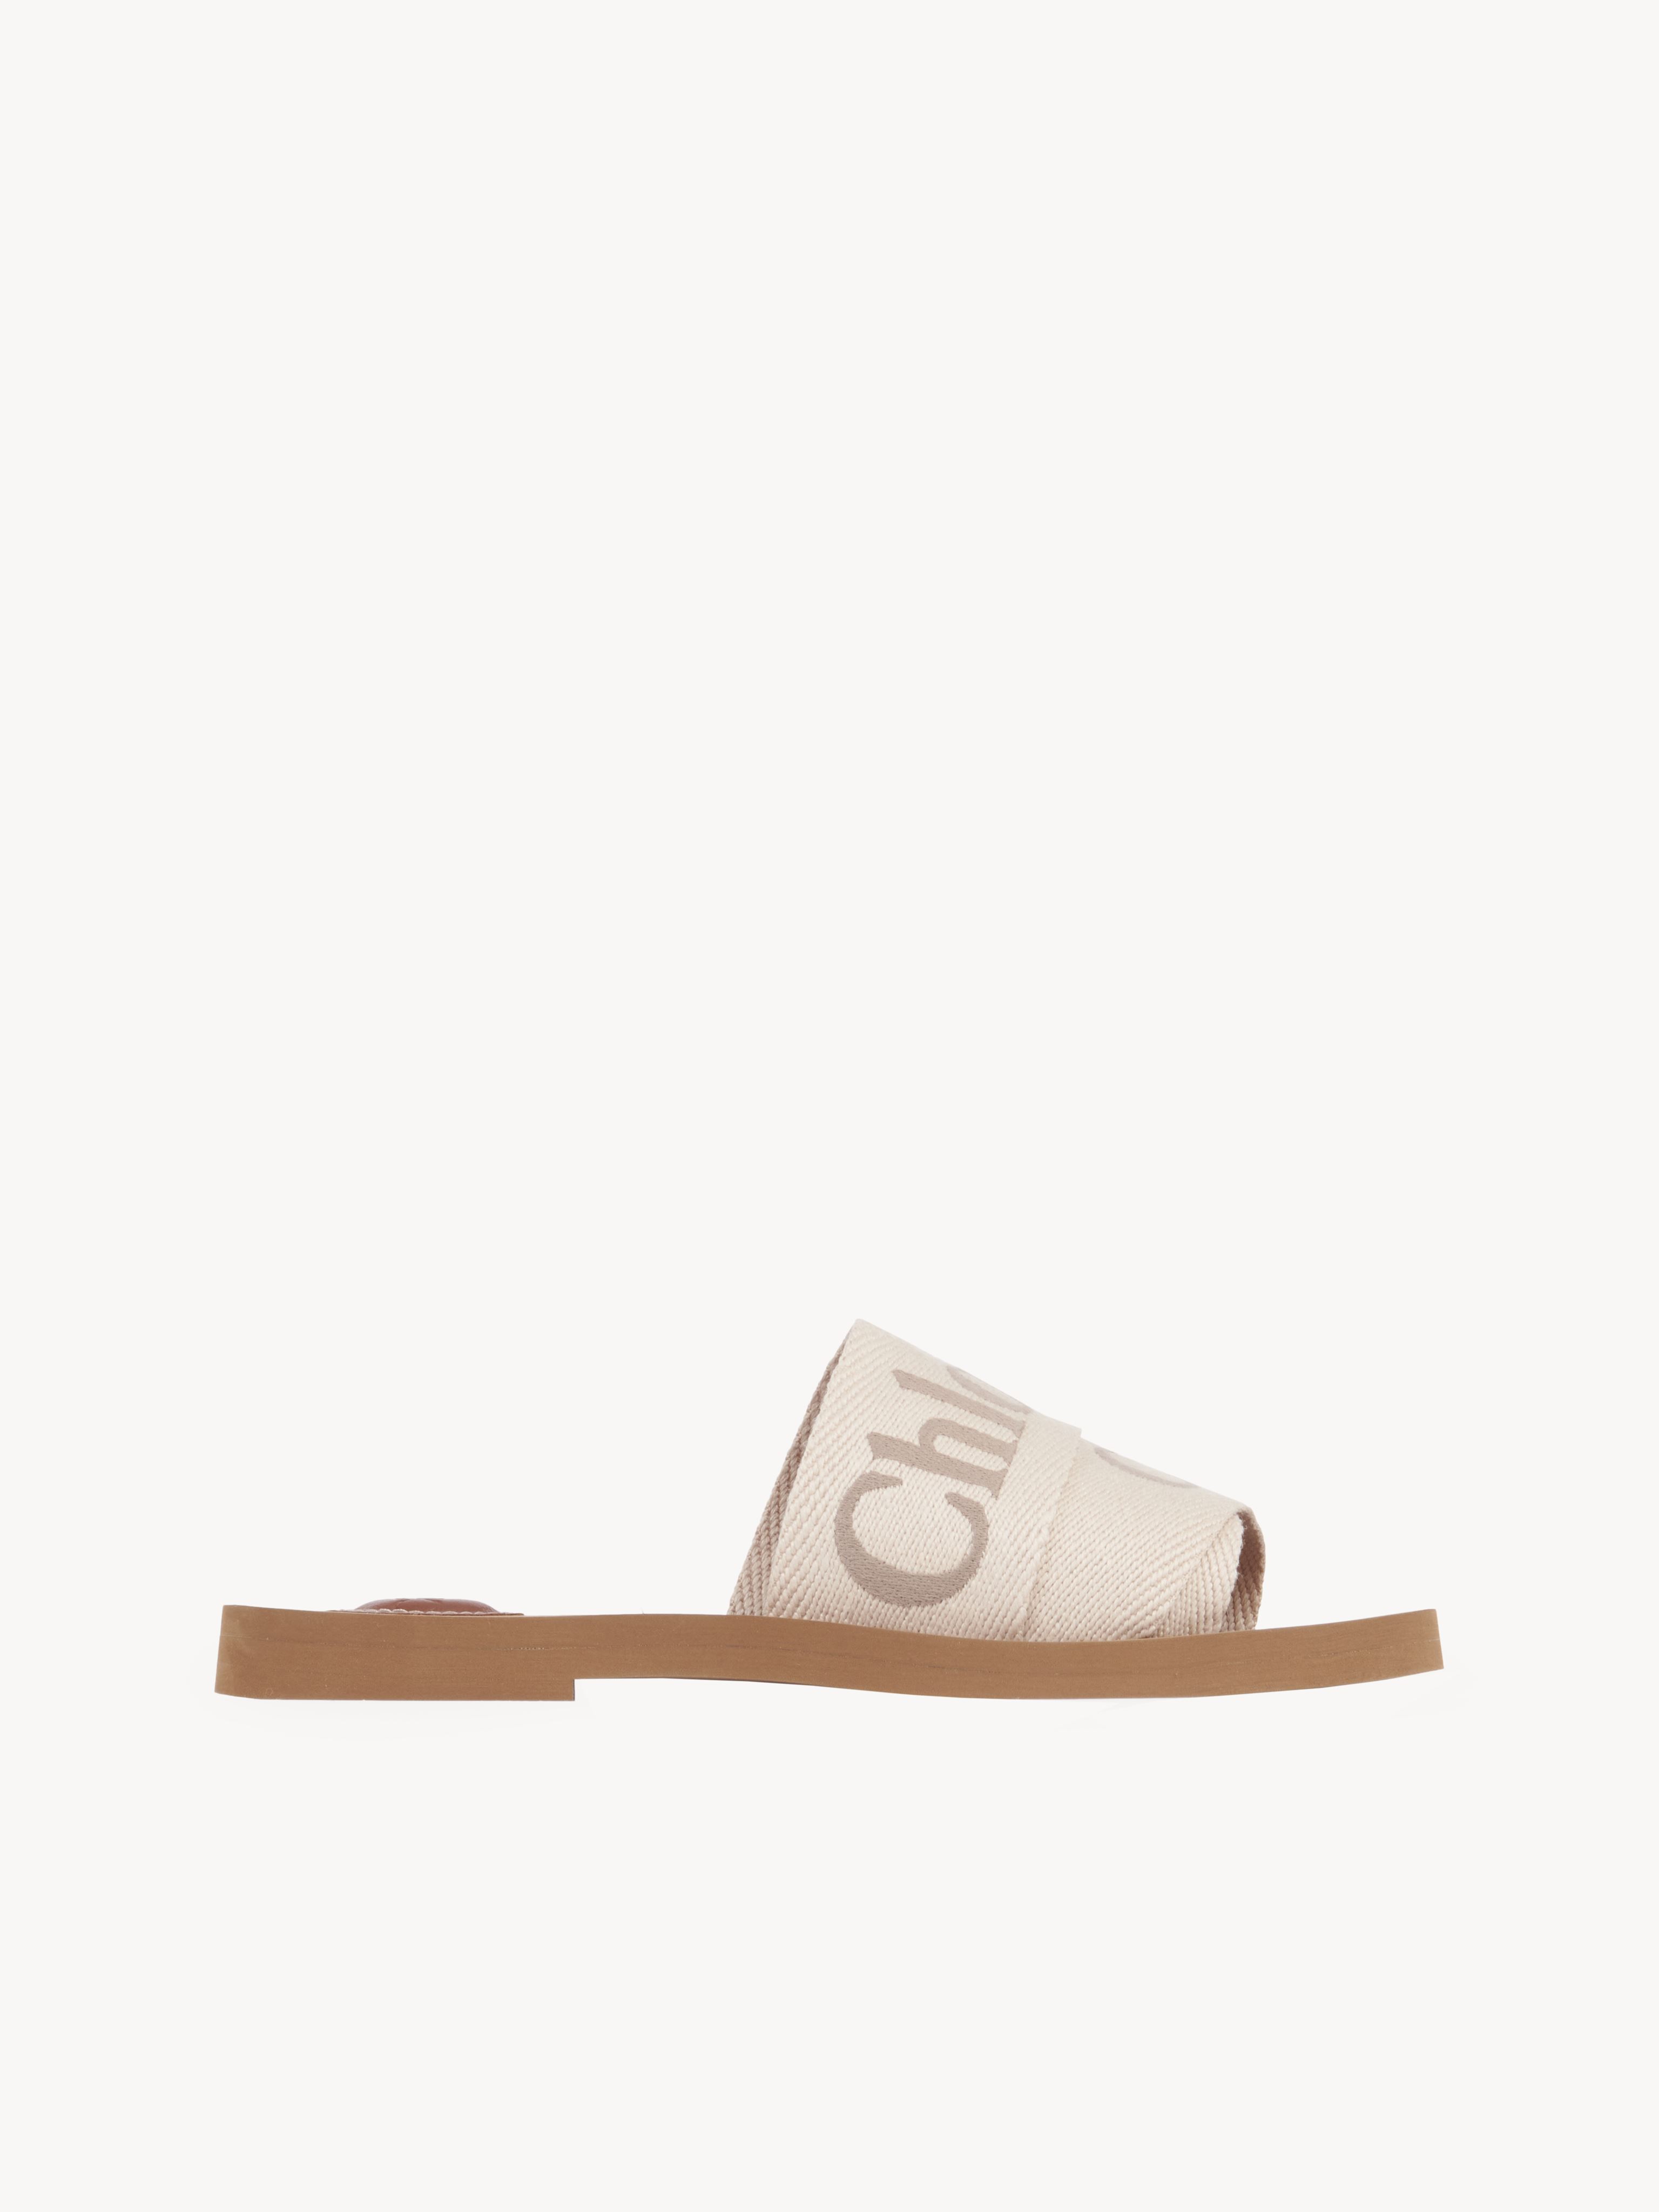 Chloé Mules Plates Woody Femme Beige Taille 37 90% Lin, 10% Polyester